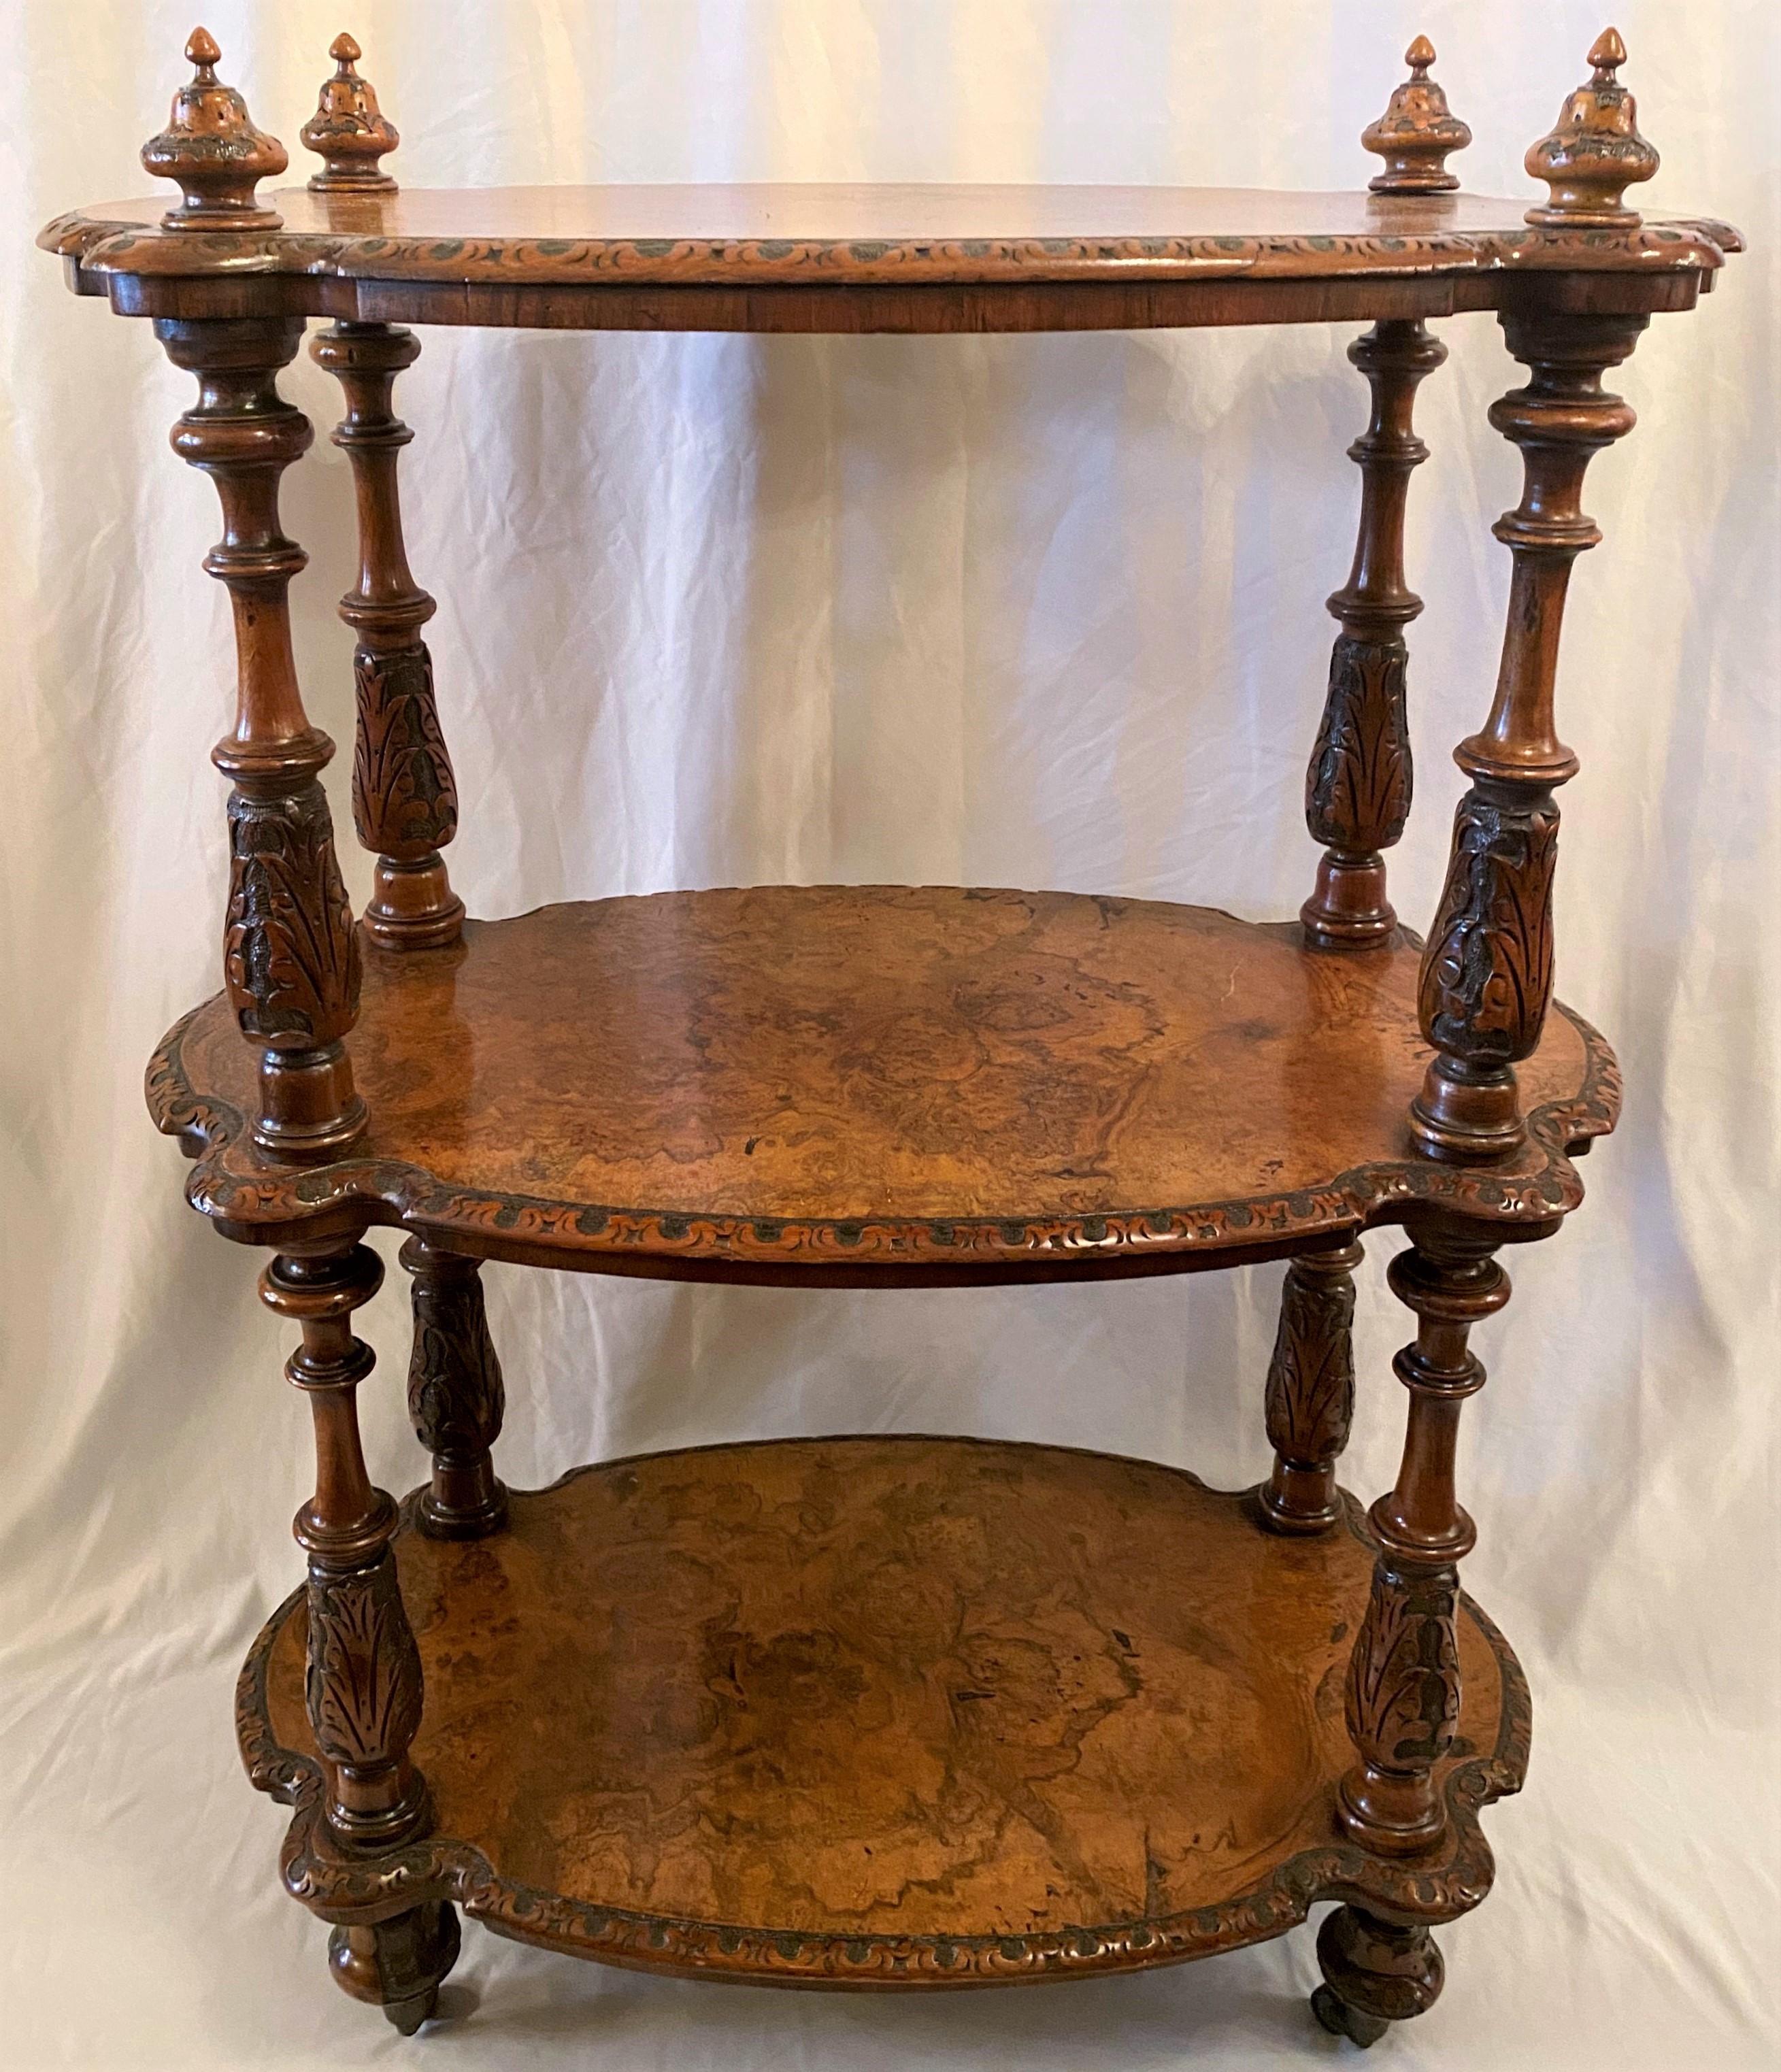 Antique English fine burled walnut with inlay 3-tier étagère on casters, circa 1860.